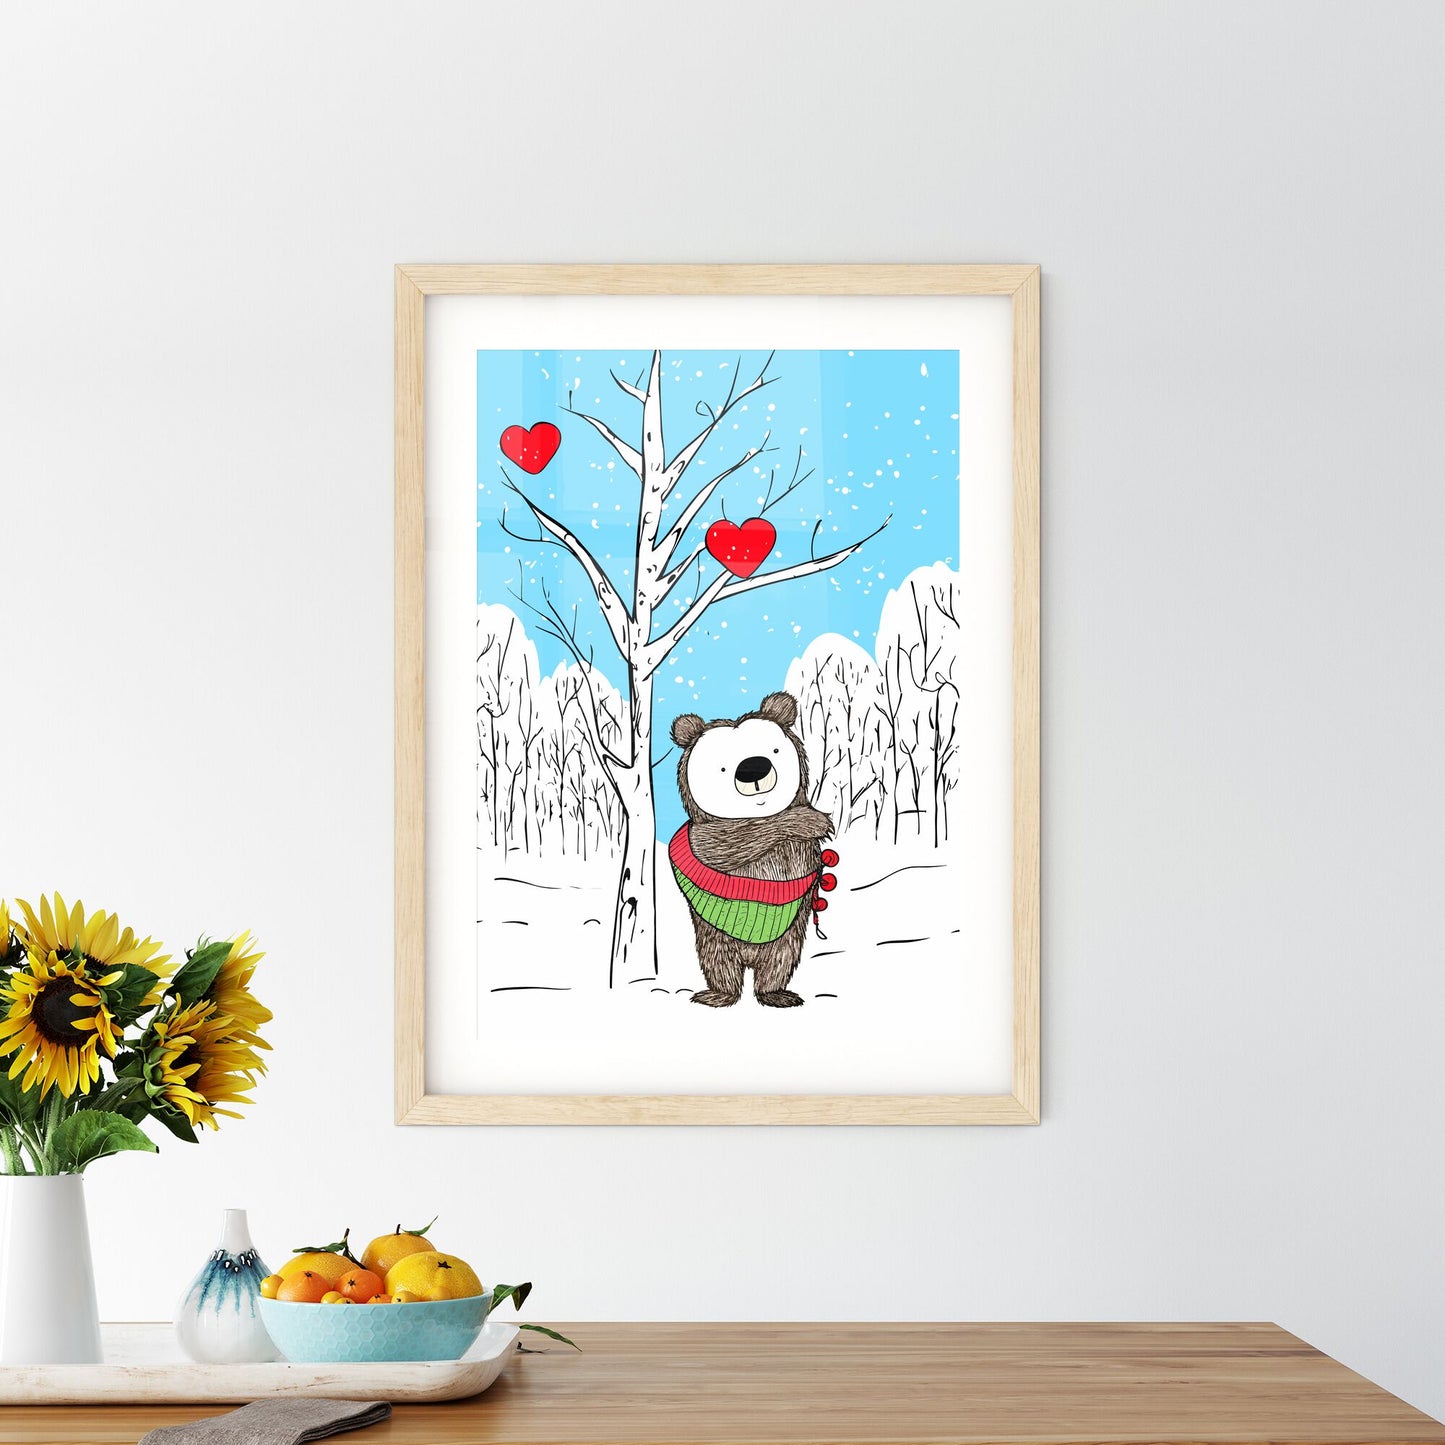 Merry Christmas Card With A Cute Bear Huging A Heart - A Cartoon Of A Bear Standing In A Snowy Forest Default Title